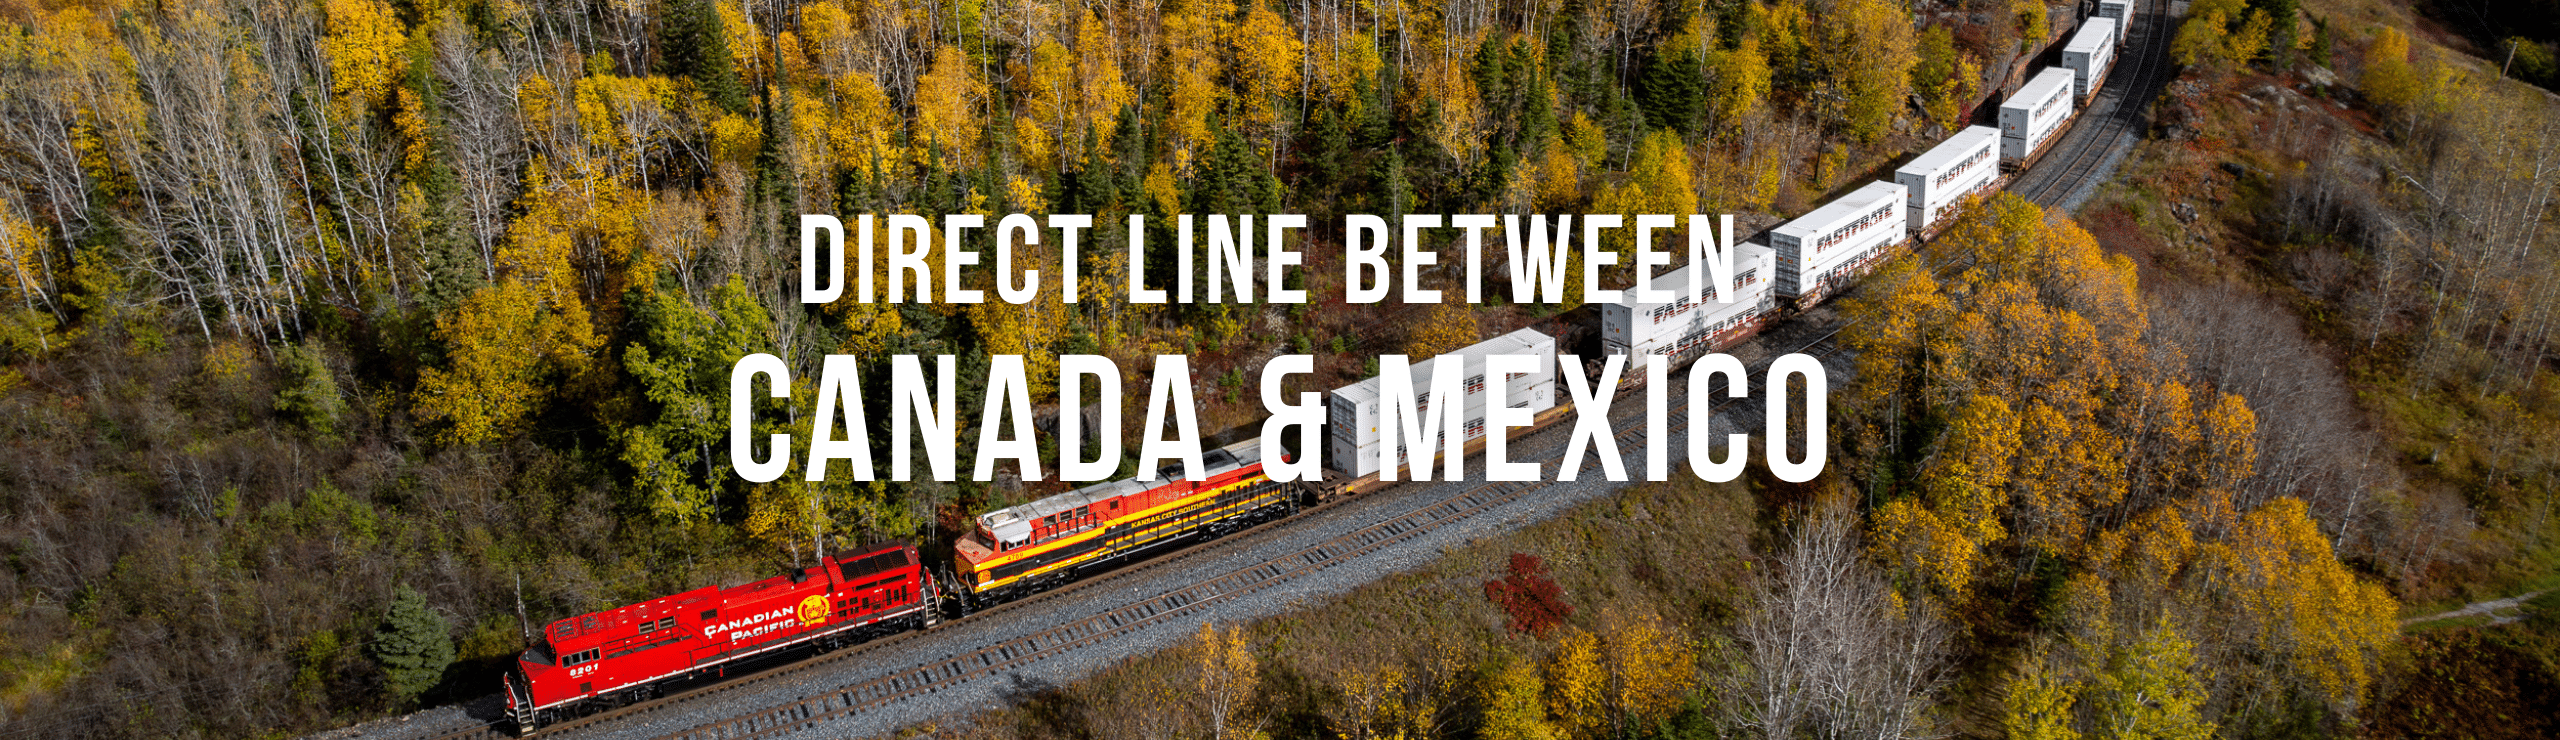 Mexico and Canada rail banner